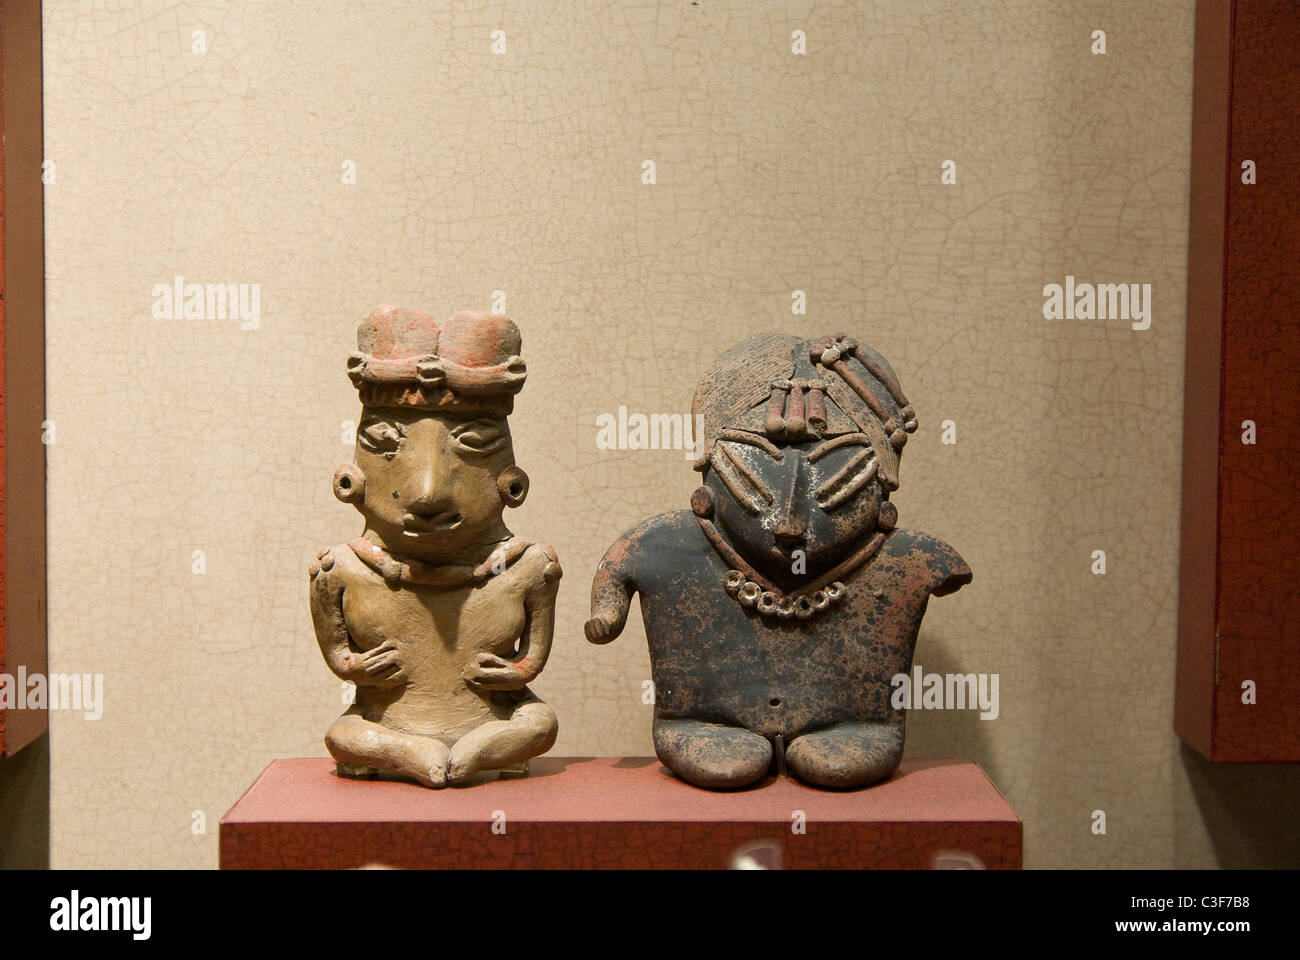 Mexico.Mexico city.National Museum of Anthropology.Ceramic figure . Stock Photo